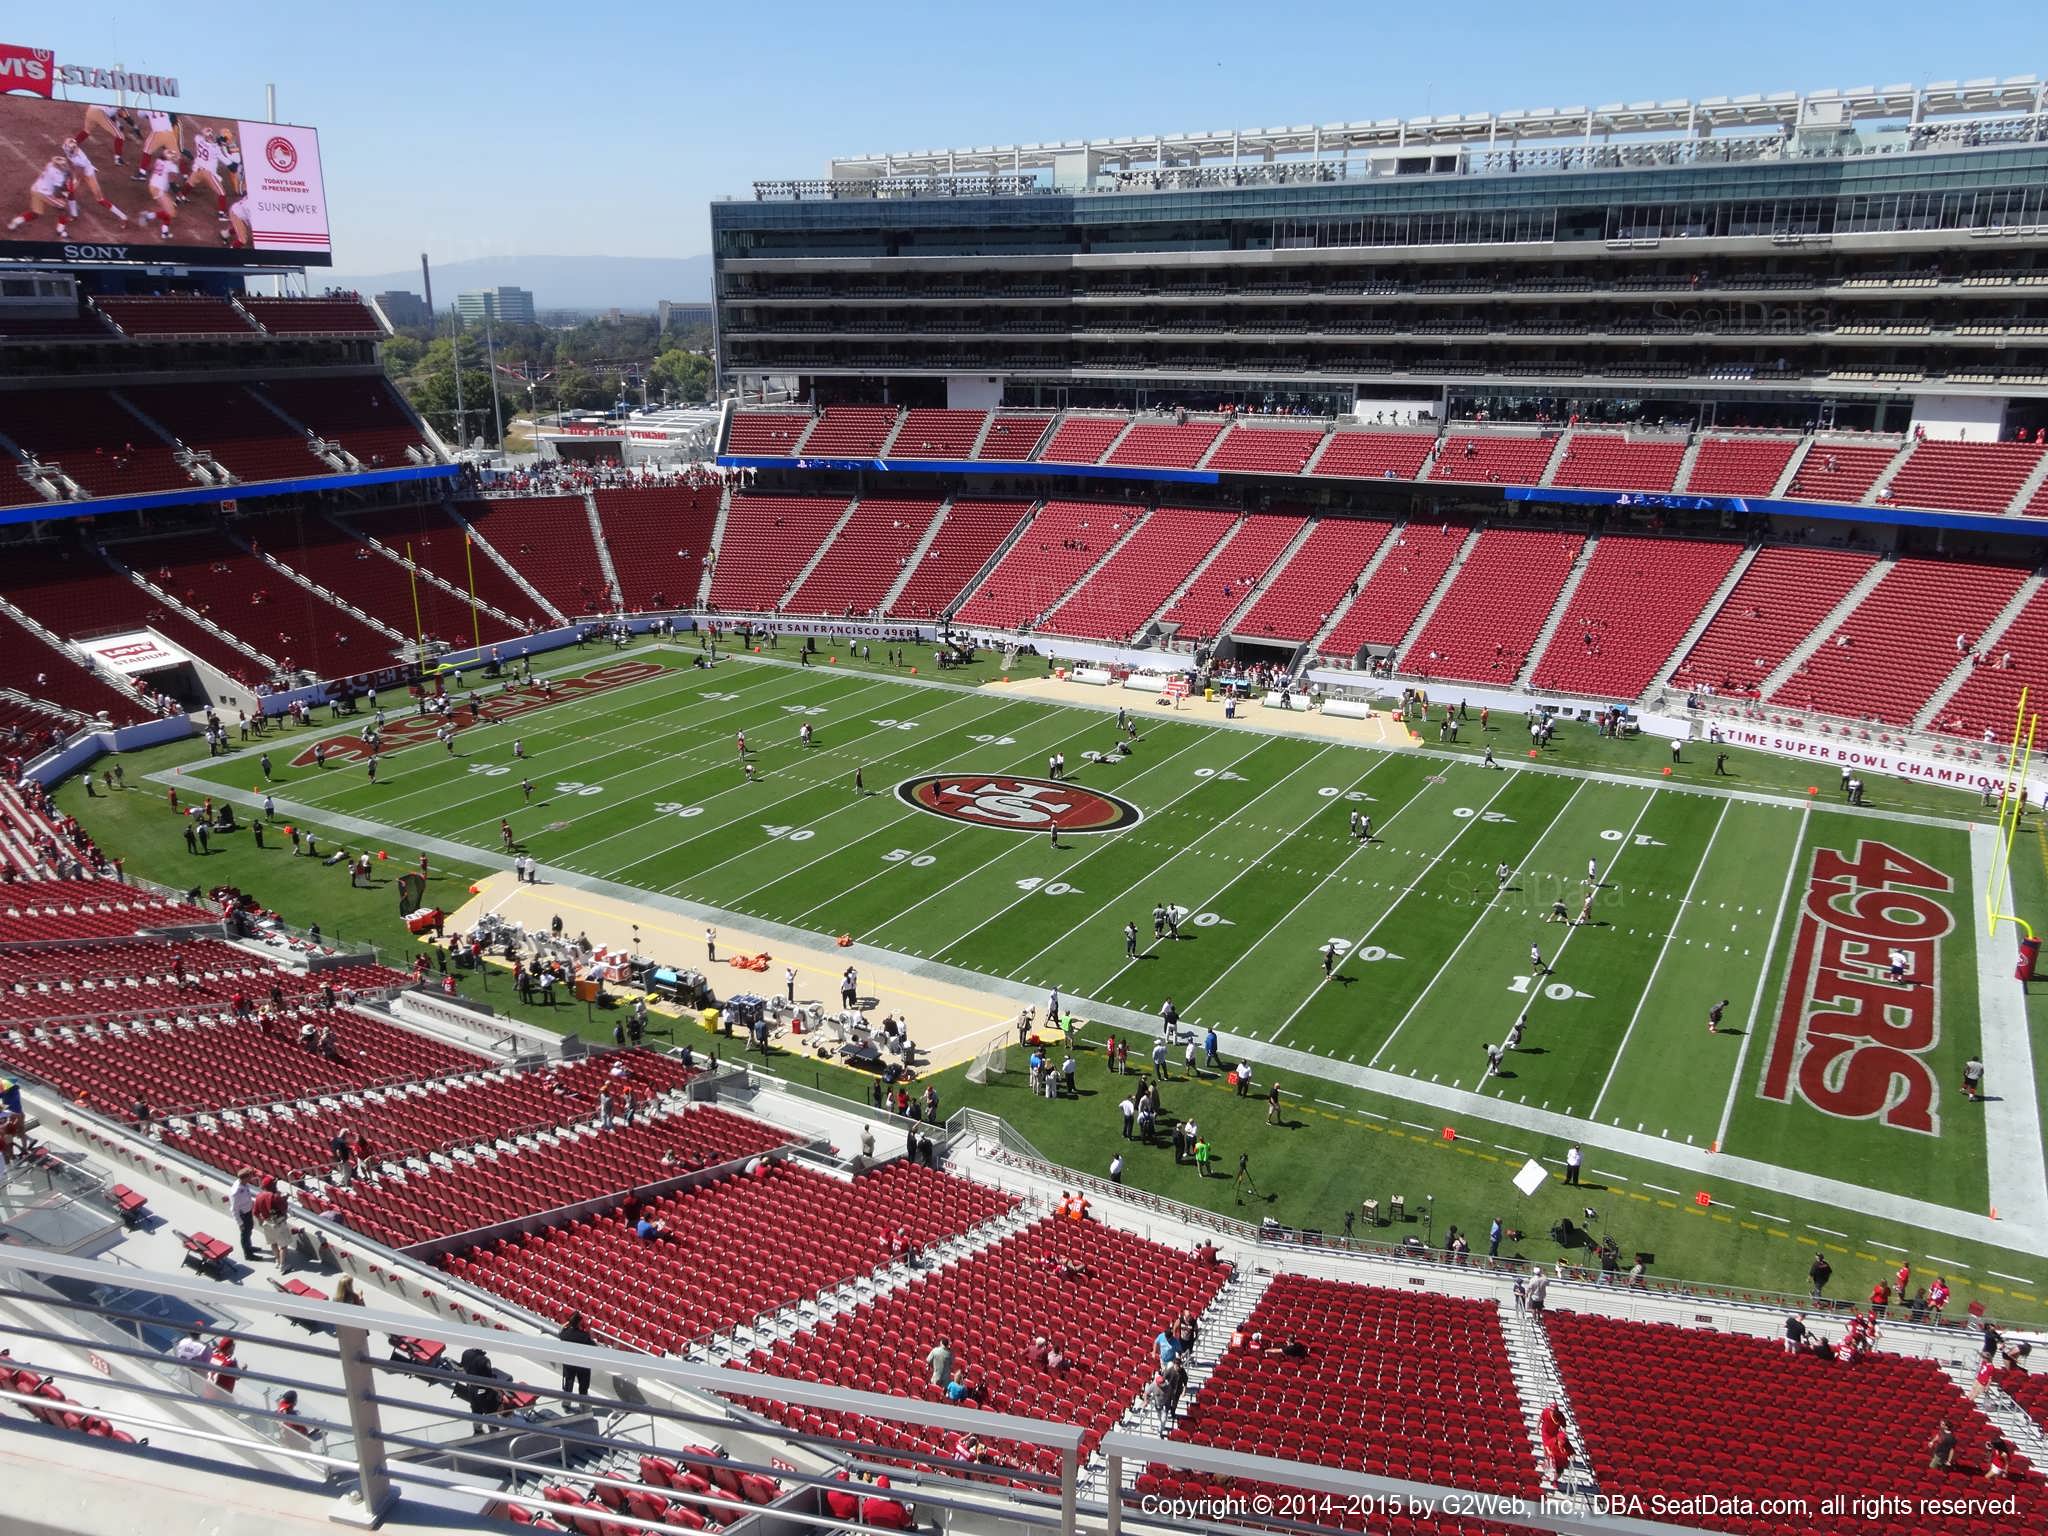 Seat view from section 311 at Levi’s Stadium, home of the San Francisco 49ers